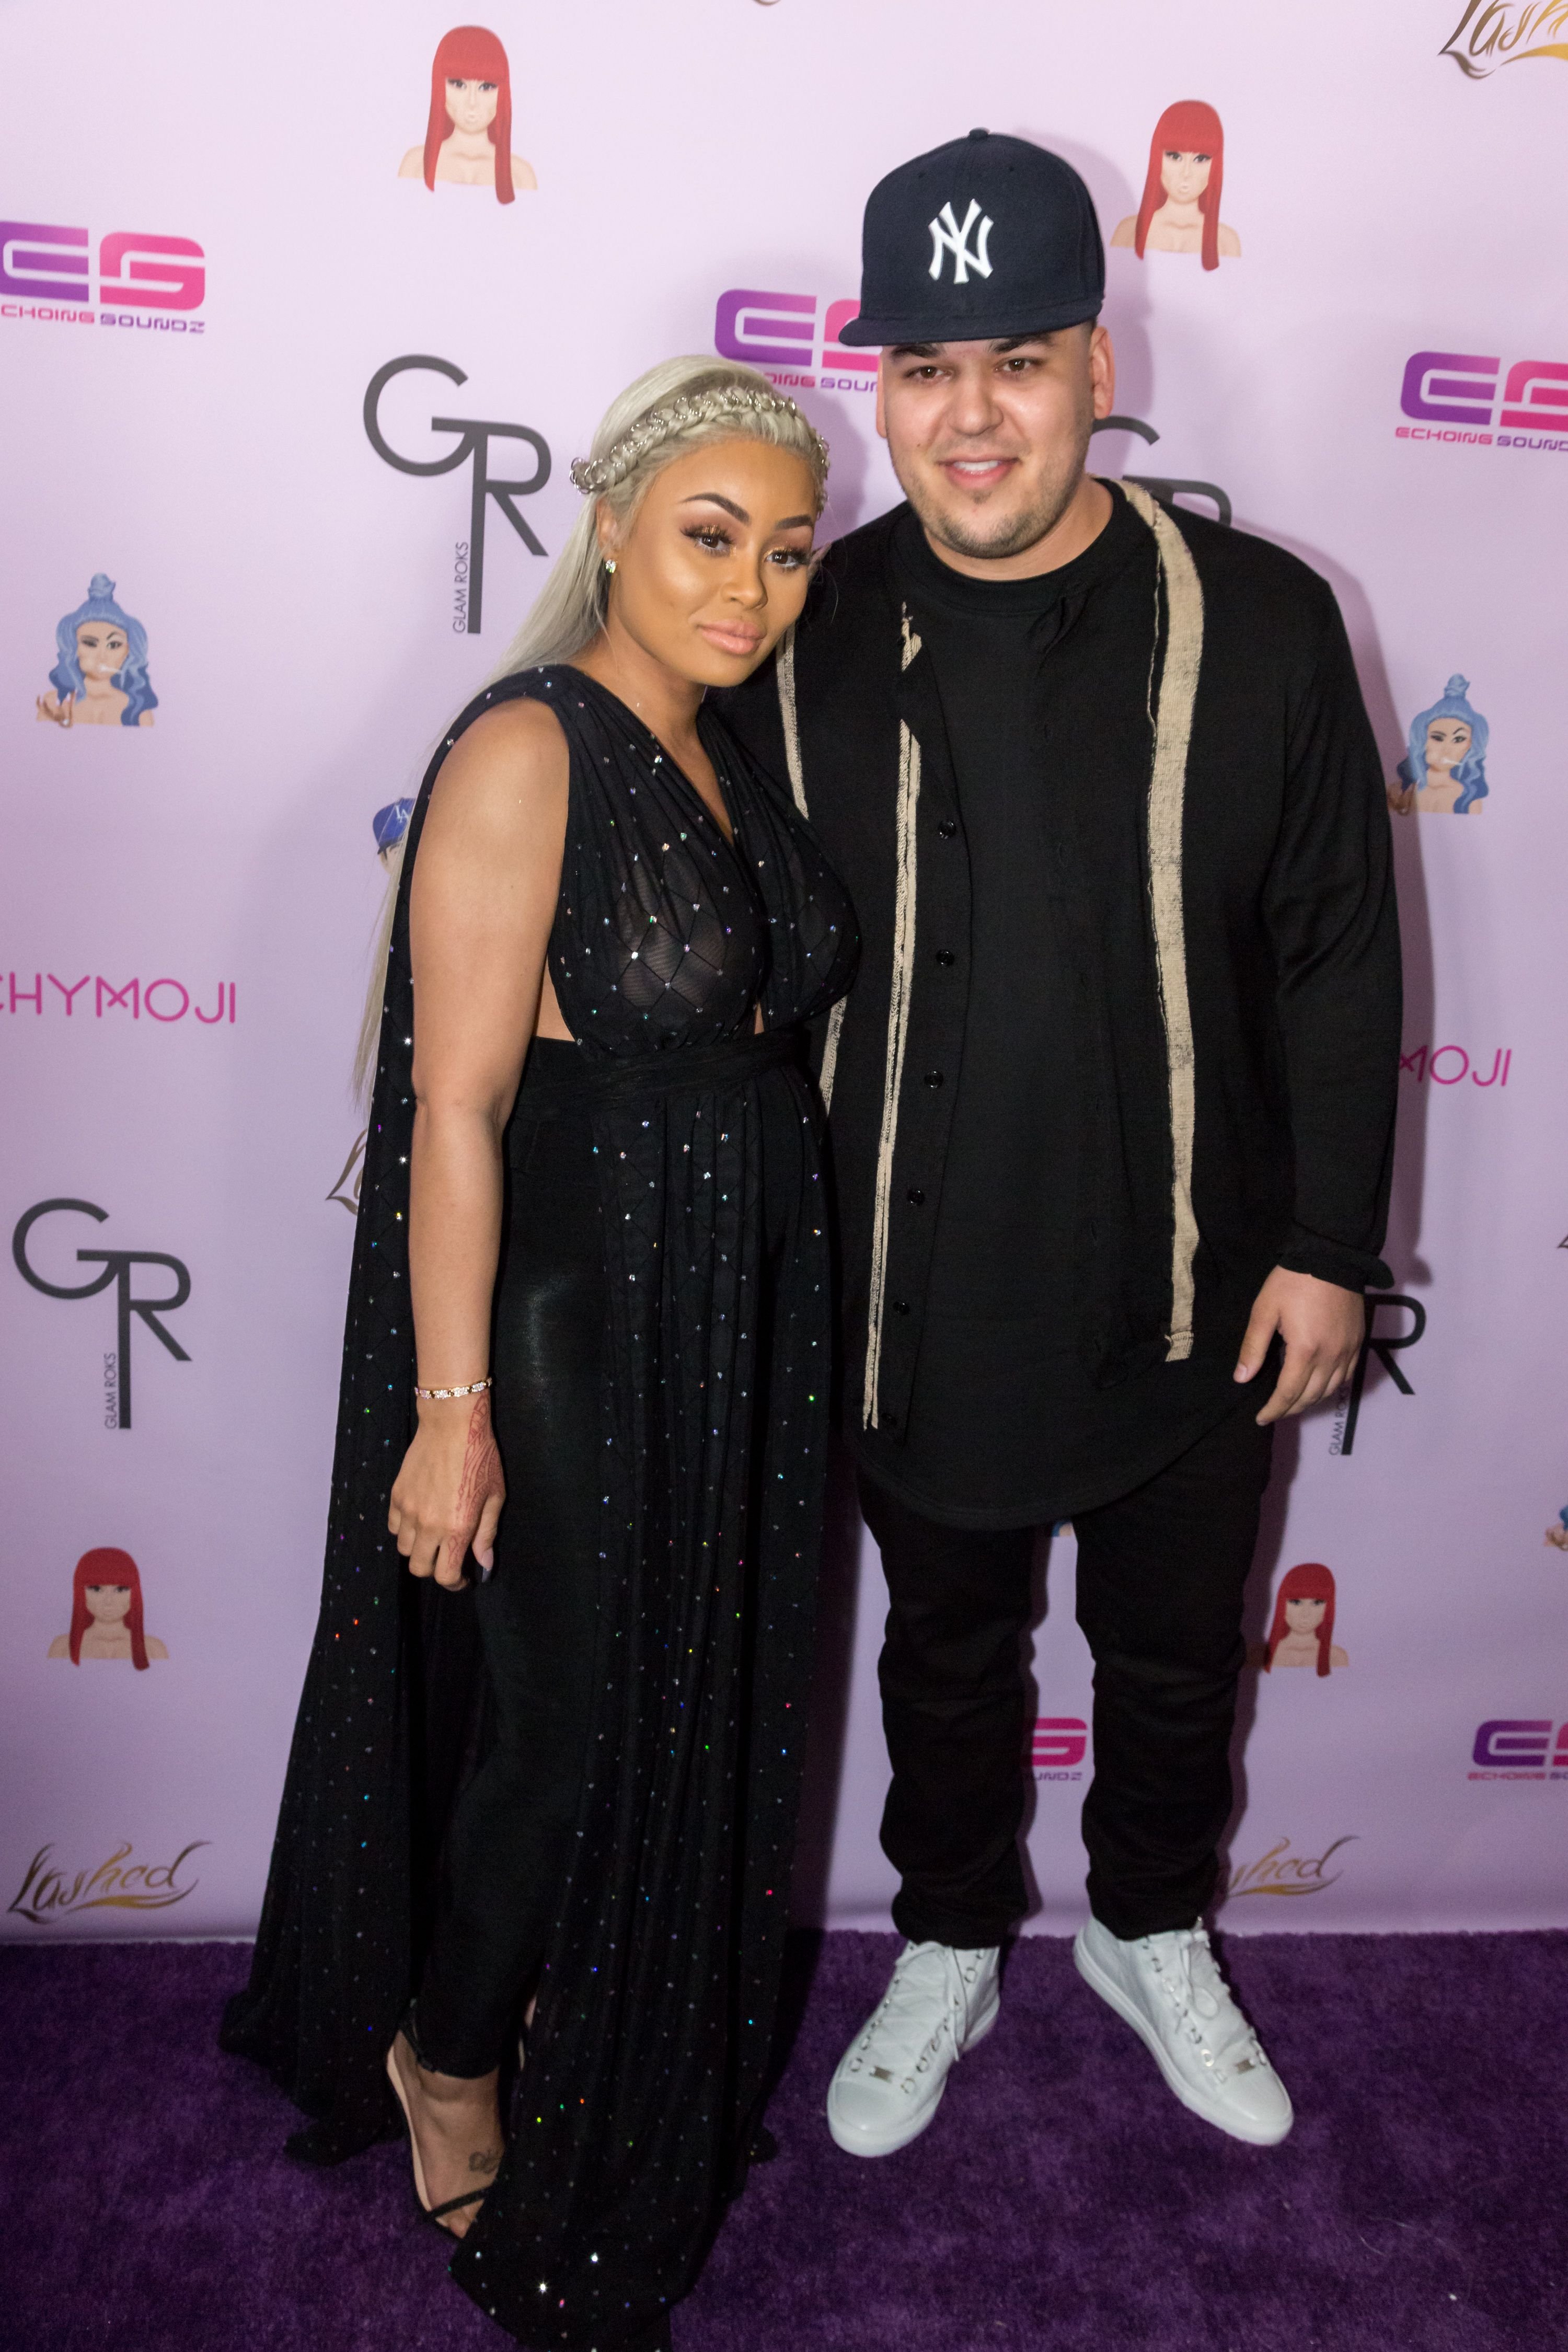 Rob Kardashian and Blac Chyna at her birthday celebration on May 10, 2016 in Hollywood. | Photo: Getty Images